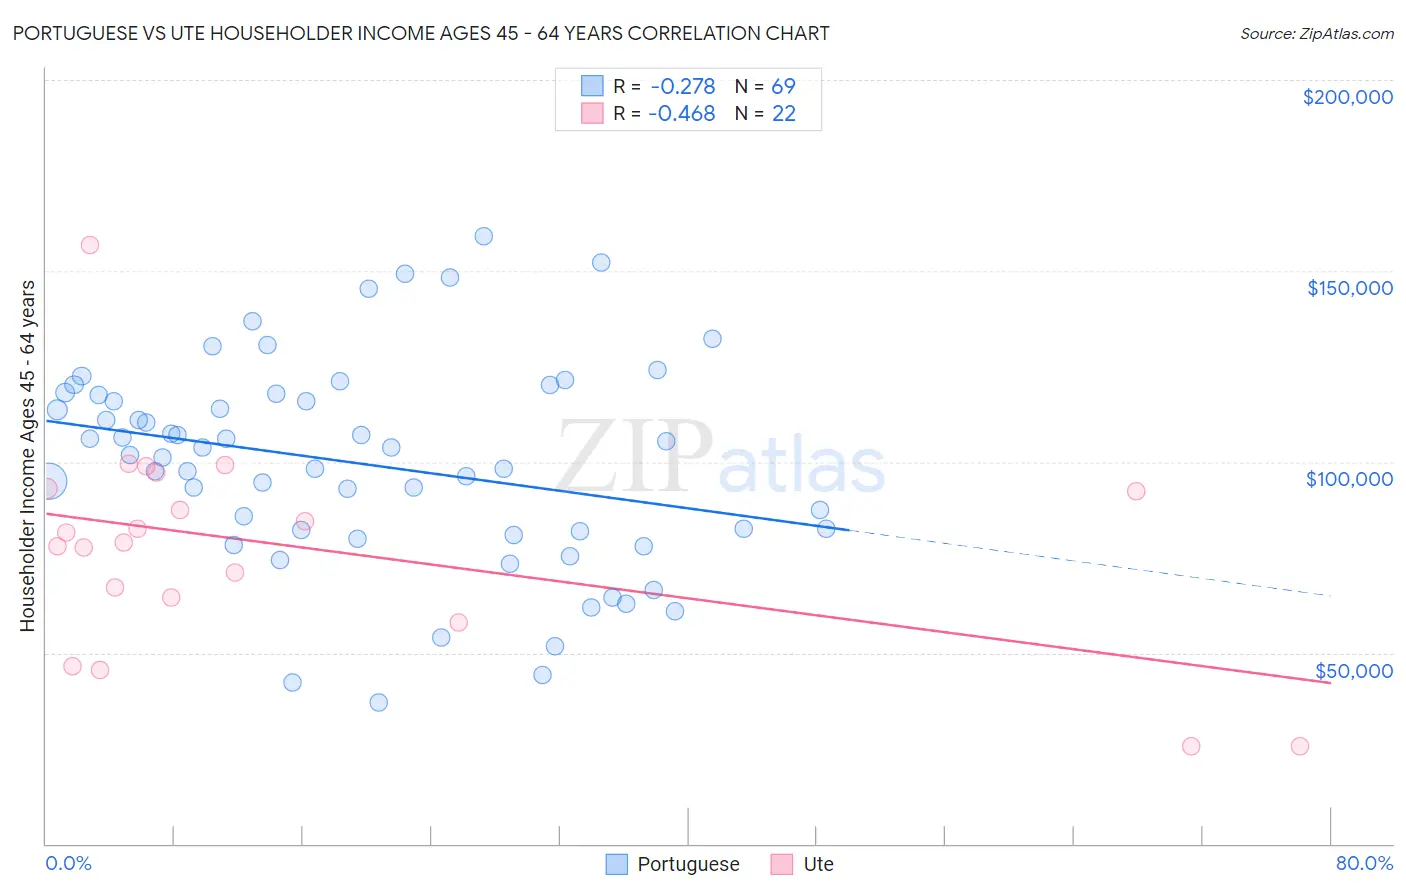 Portuguese vs Ute Householder Income Ages 45 - 64 years